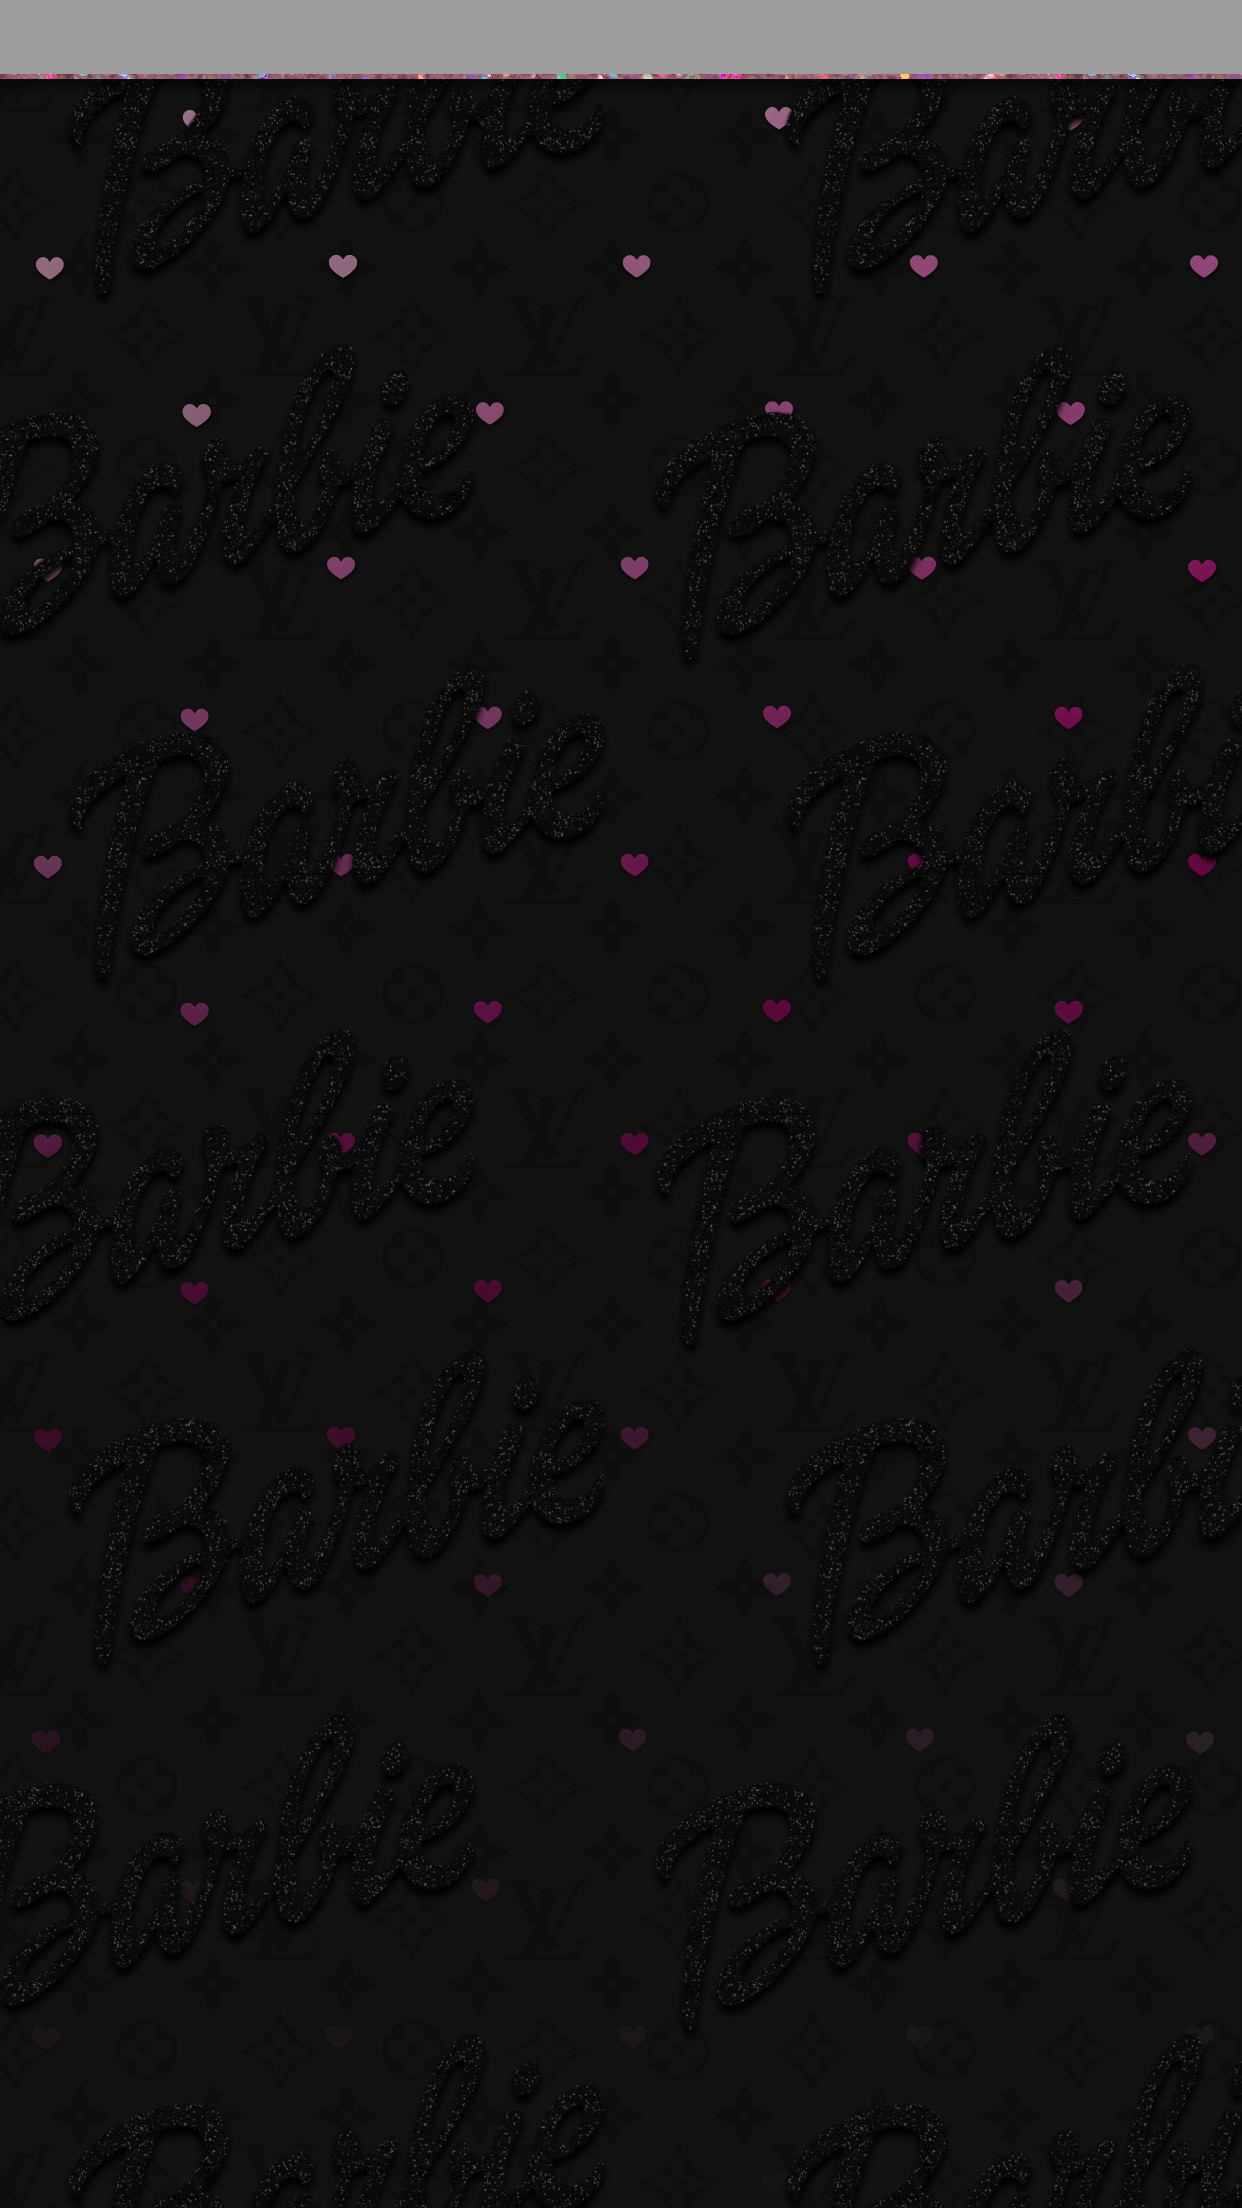 1242x2208 Heart Wallpaper, Hello Kitty Wallpaper, Wallpaper Patterns, Wallpaper  Backgrounds, Iphone Wallpapers, Wall Papers, Design Patterns, Android,  Barbie